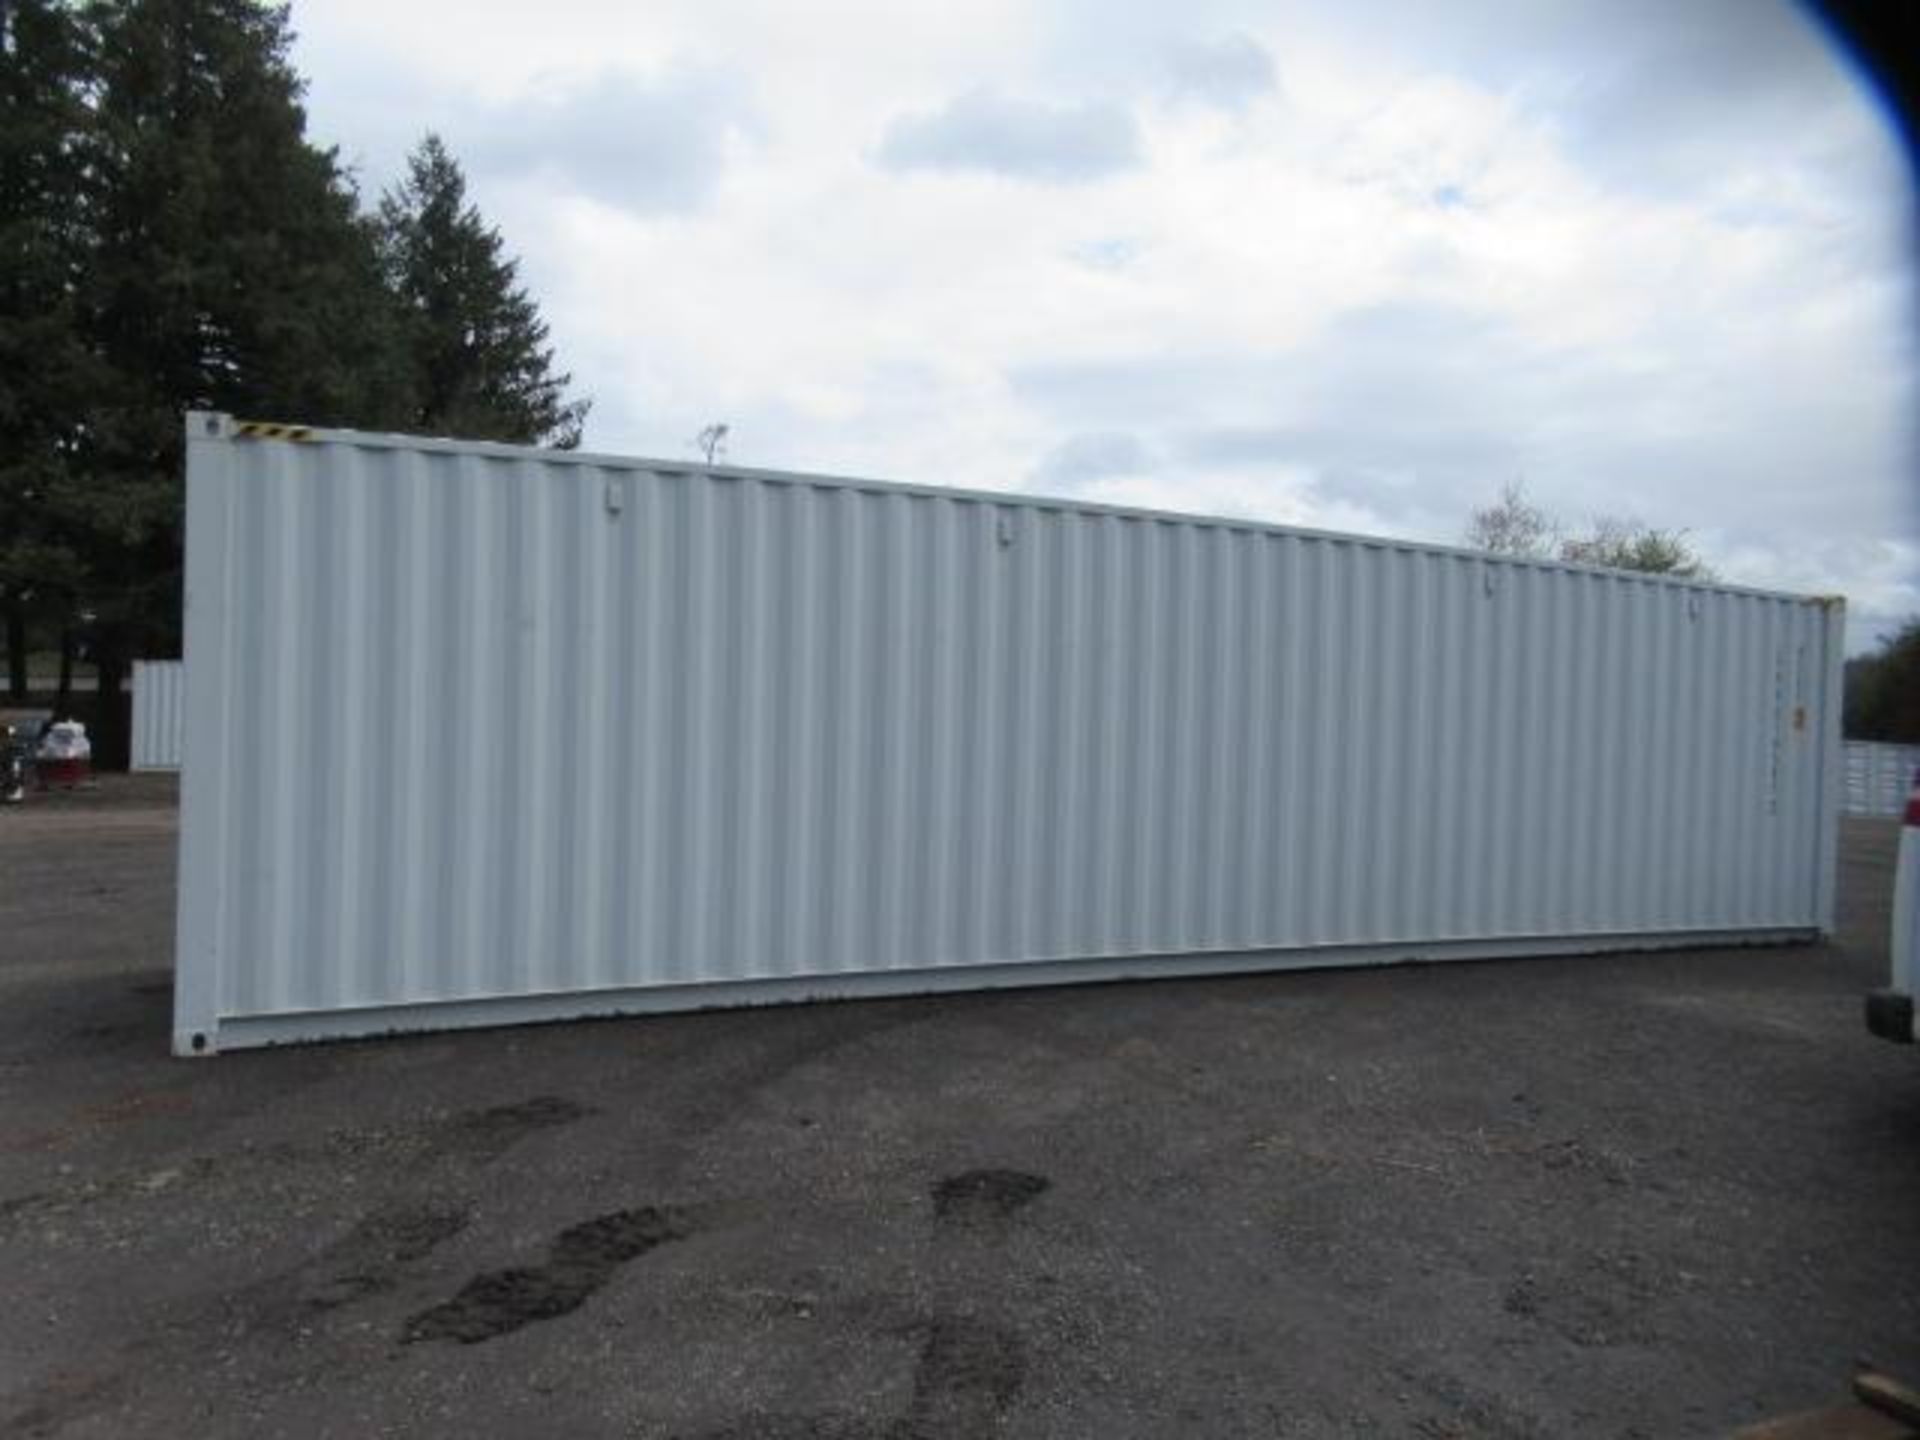 2024 40' HIGH CUBE SHIPPING CONTAINER W/ (4) SIDE DOORS, SER#: LYPU0145852 (UNUSED) - Image 3 of 6